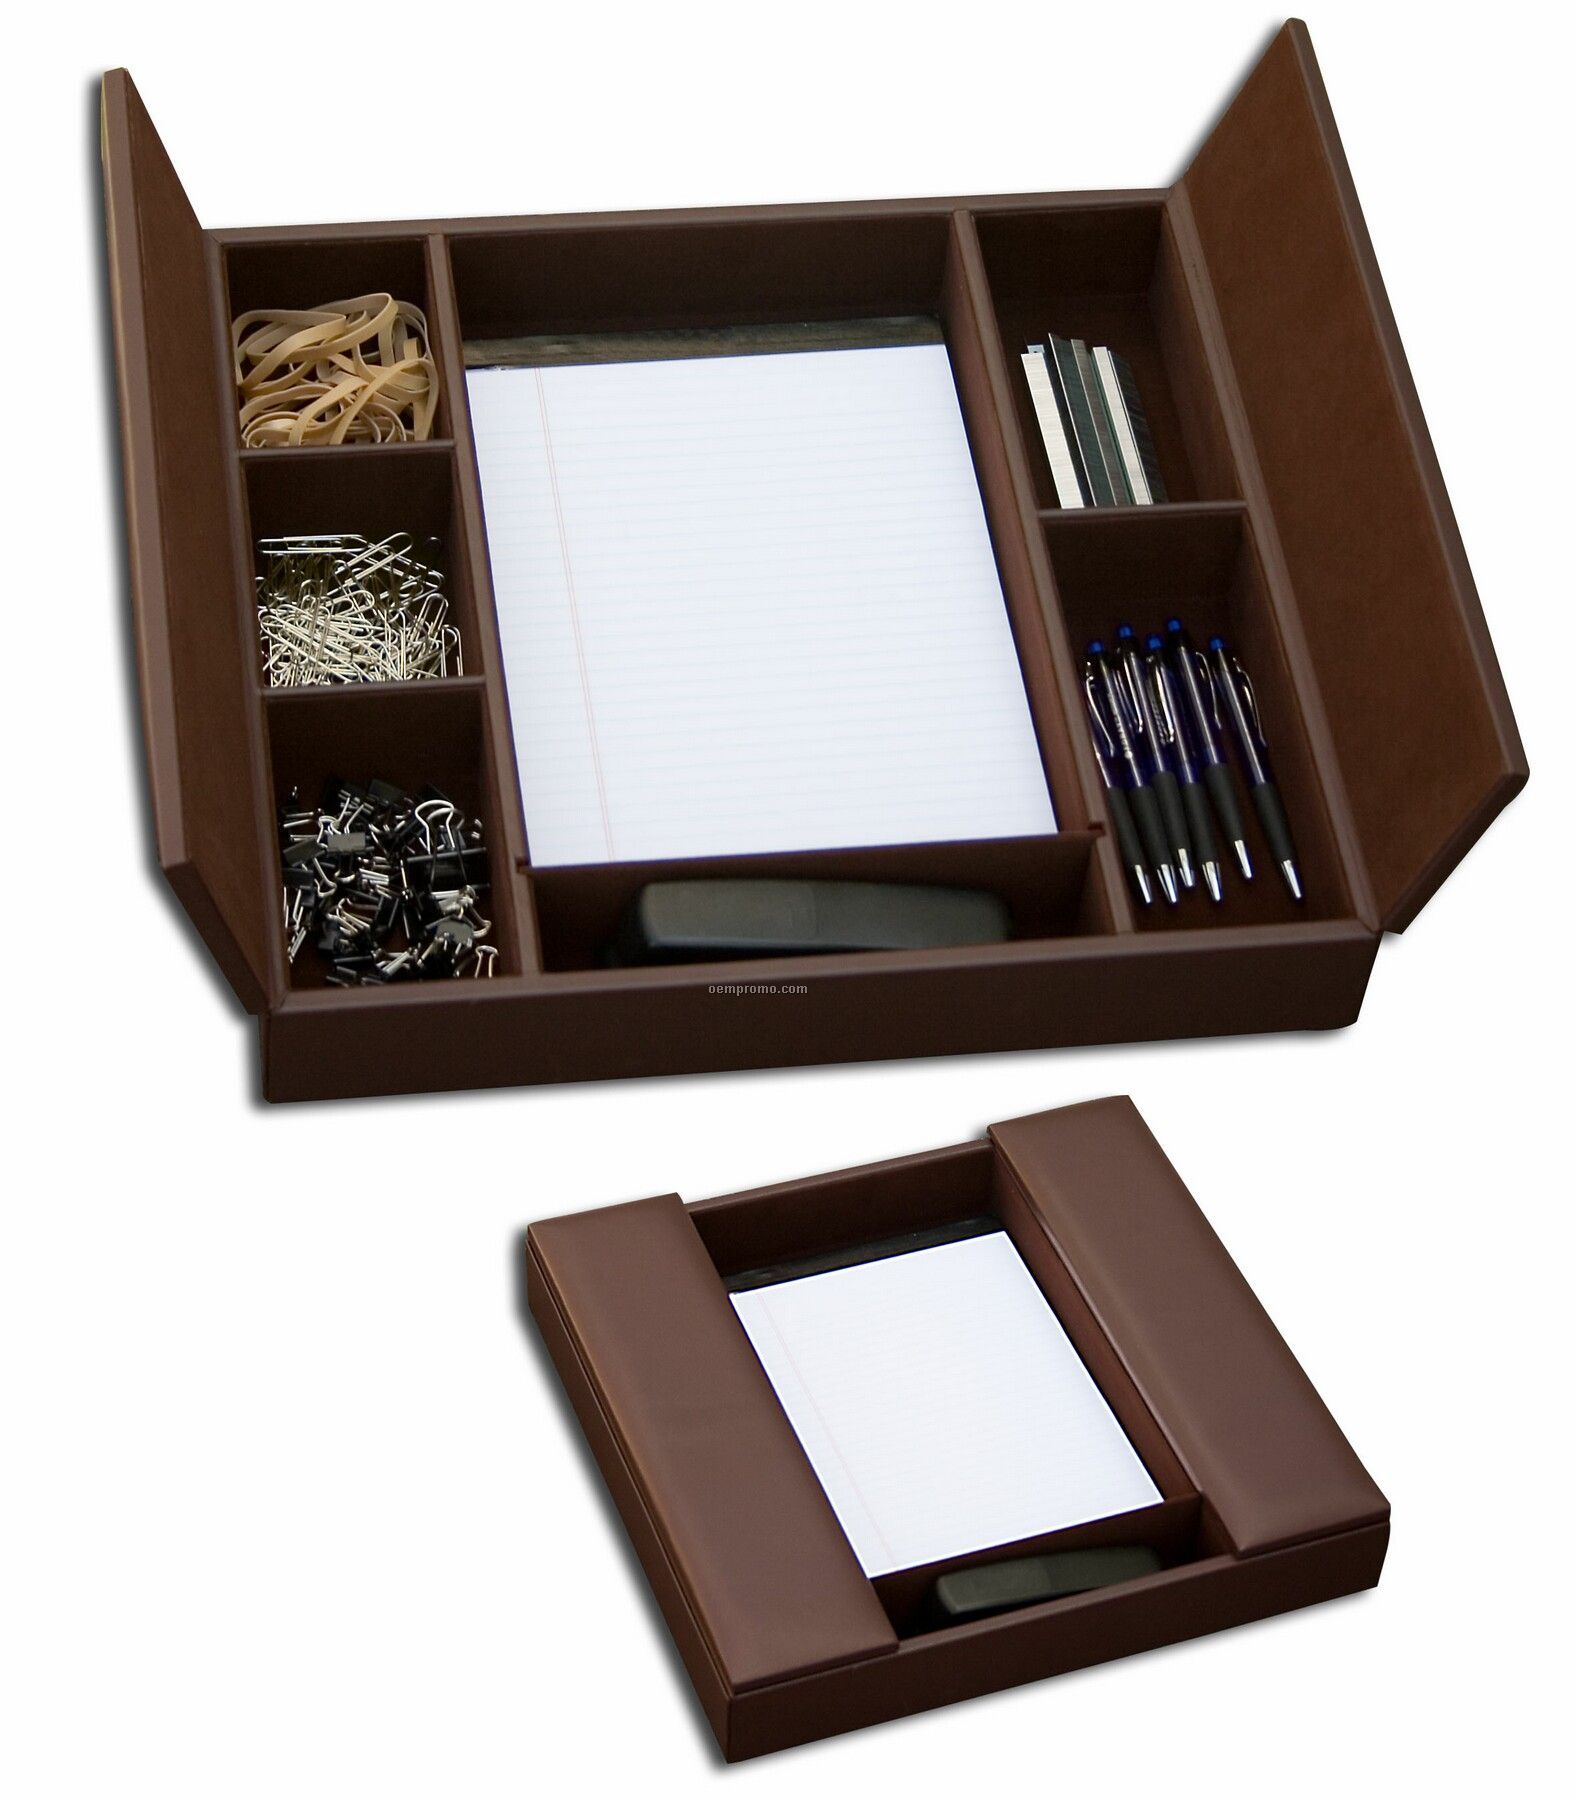 Black Classic Leather Enhanced Conference Room Organizer